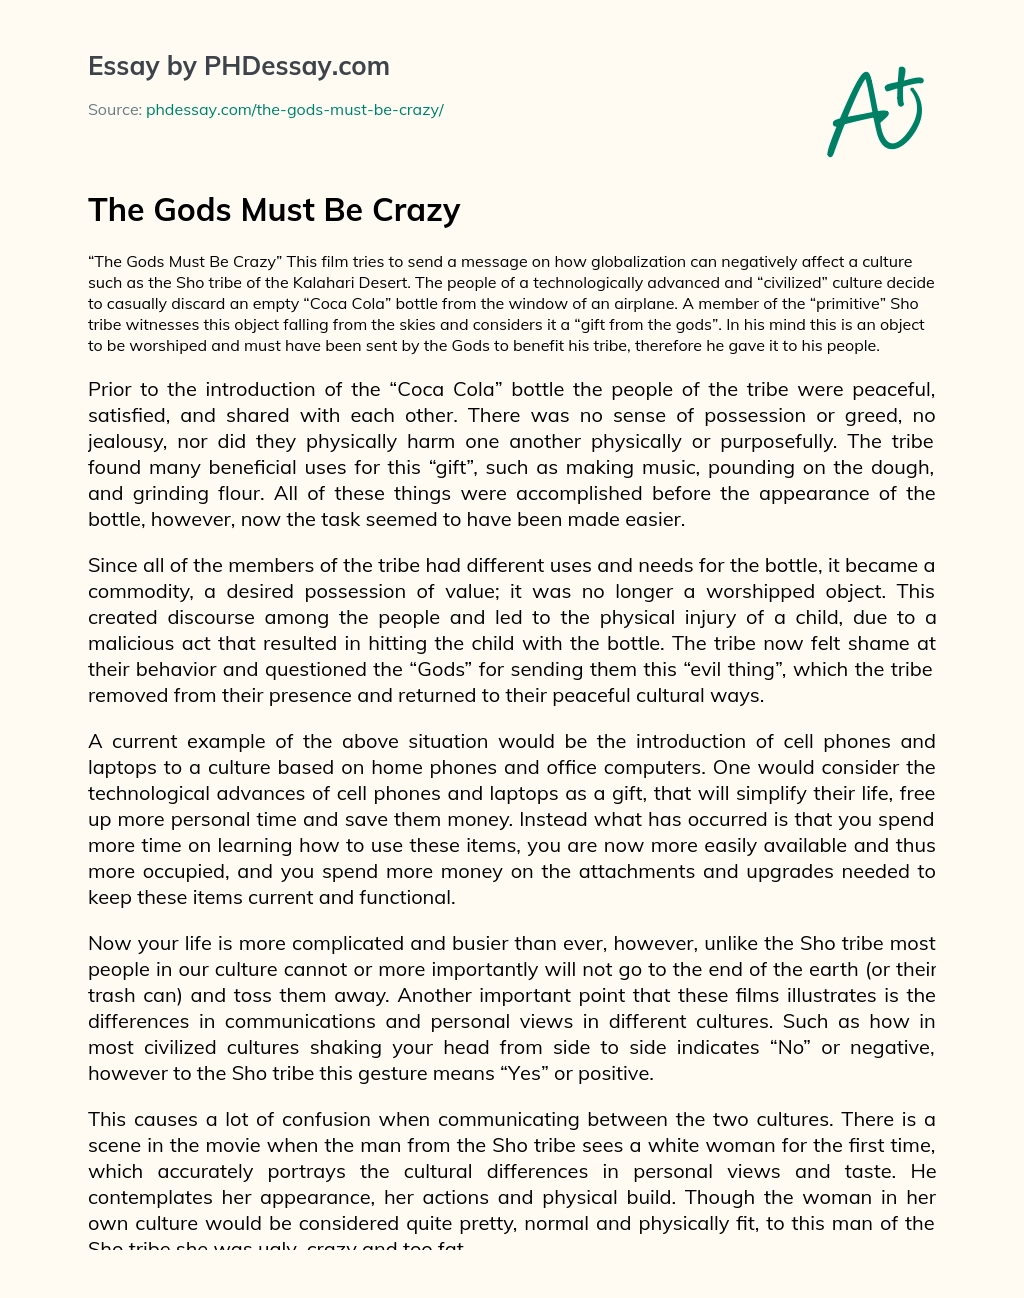 The Gods Must Be Crazy essay